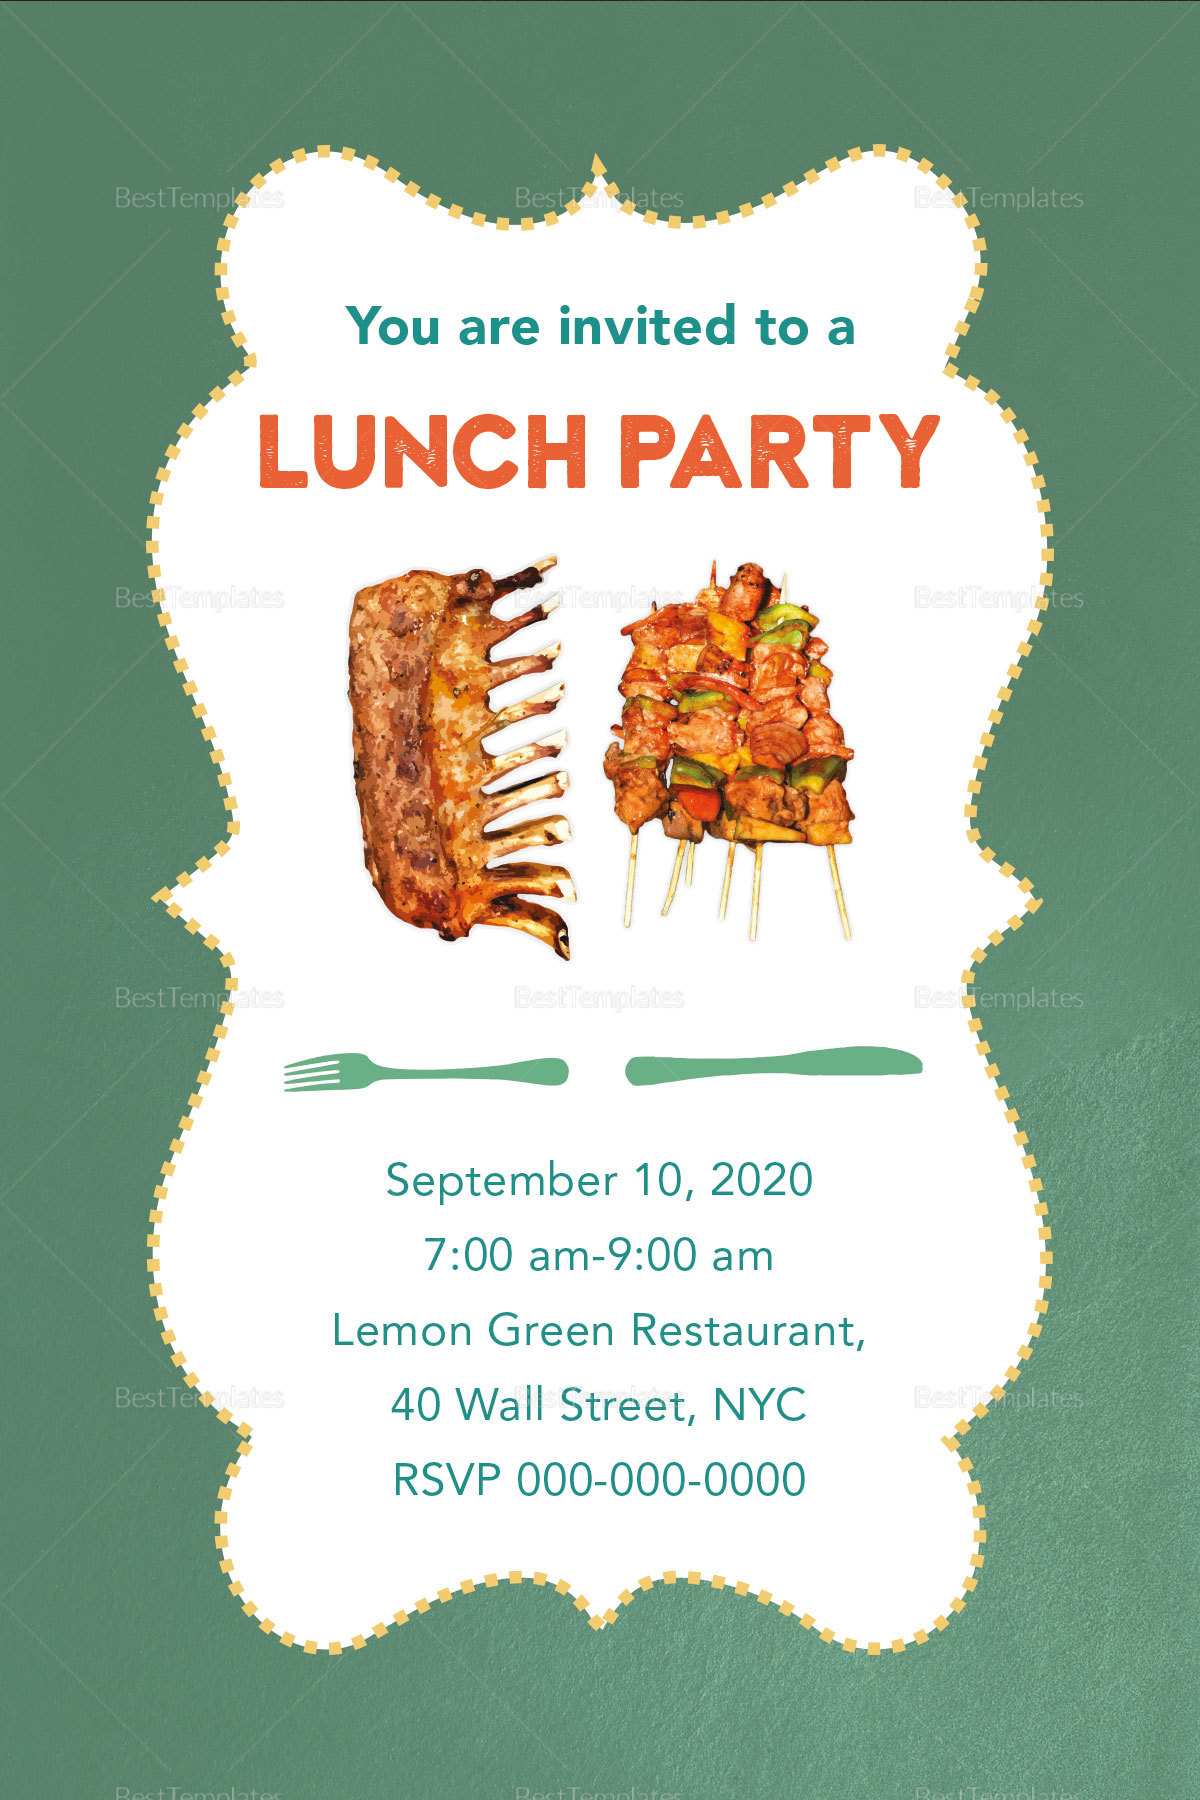 85-creative-lunch-party-invitation-template-download-for-lunch-party